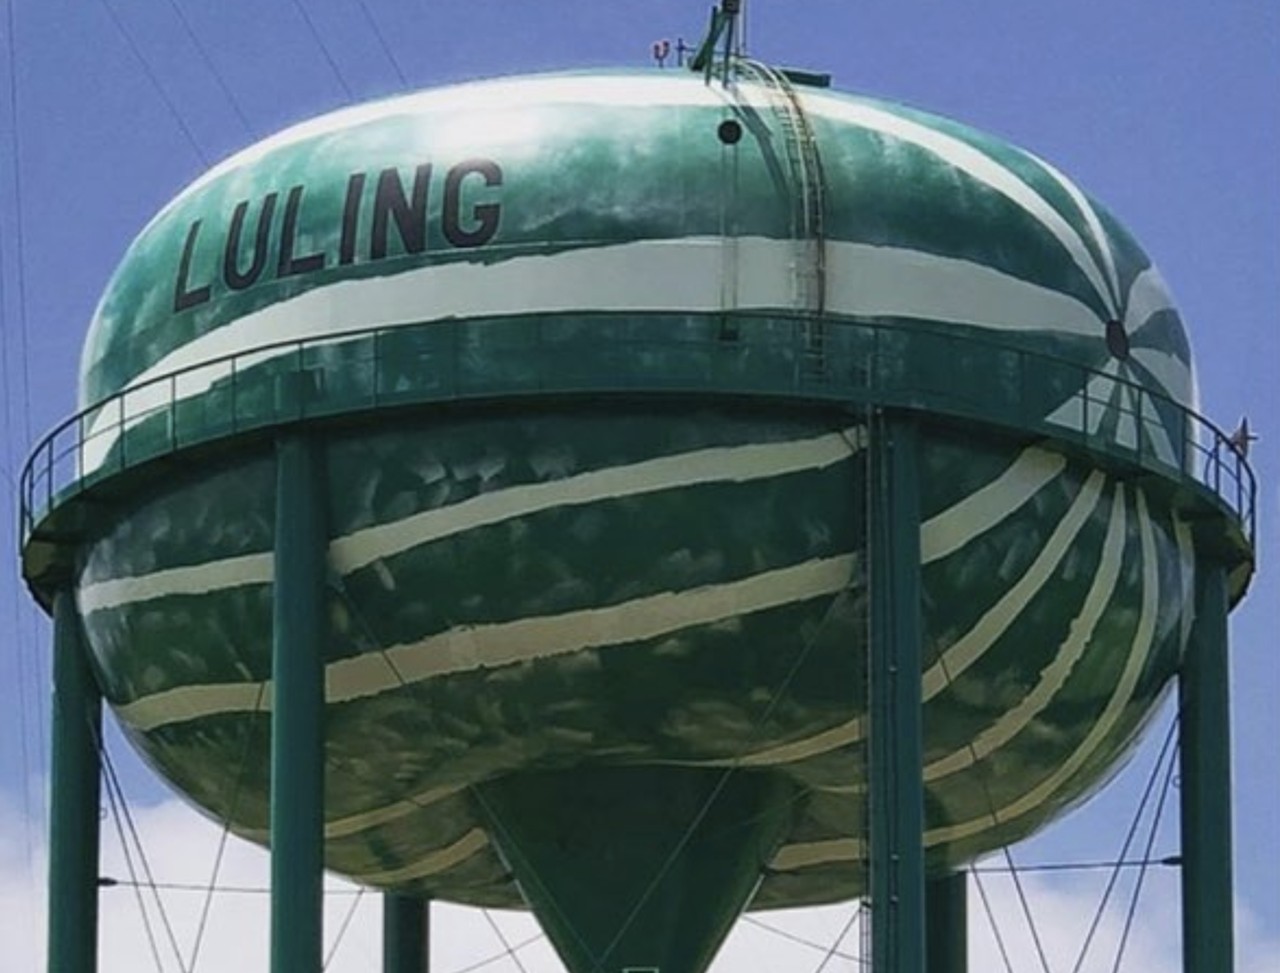 Watermelon Water Tower, Luling
1798 E Pierce St., Luling, roadsideamerica.com
Along Highway 183, another high-flying fruit can be spotted in the sky. This 154-foot tower contains some of the water that helps grow Luling’s 50 pound watermelons.
Photo via Instagram / insearchofquirk